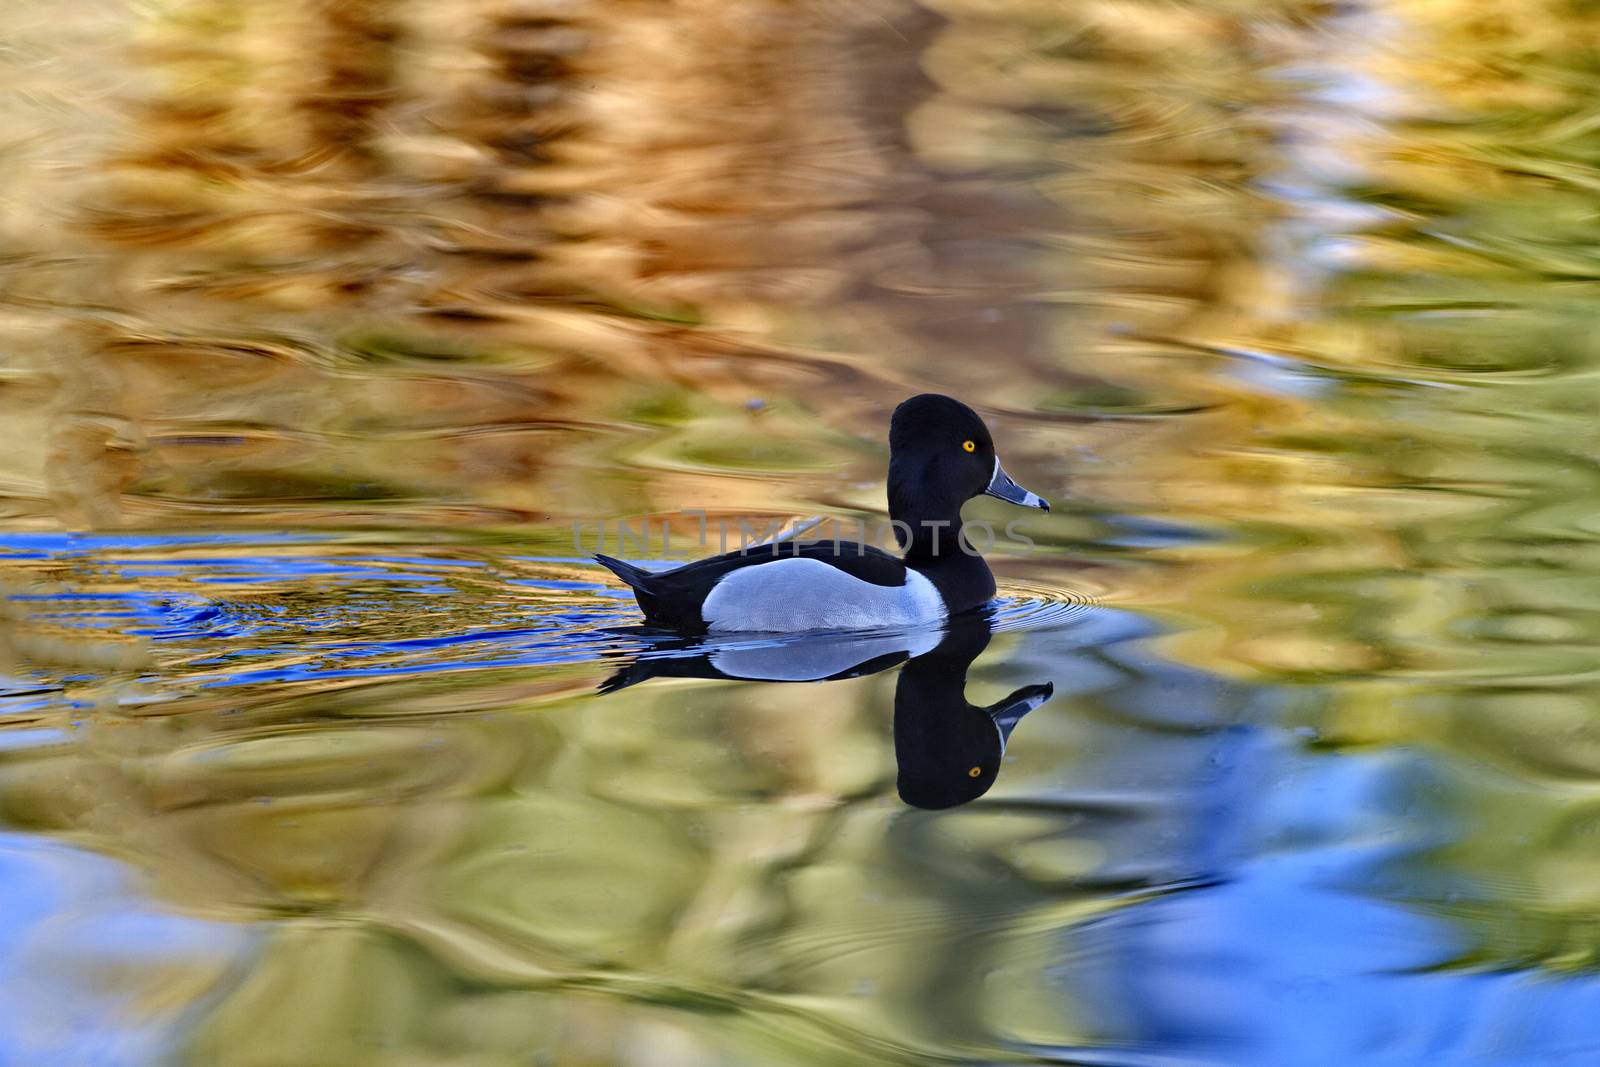 Male ring-necked duck swims with reflection in rippling water.  Gold eye and field markings visible.  Location is Agua Caliente Regional Park in Pima County of Tucson, Arizona, on February 24, 2017.  